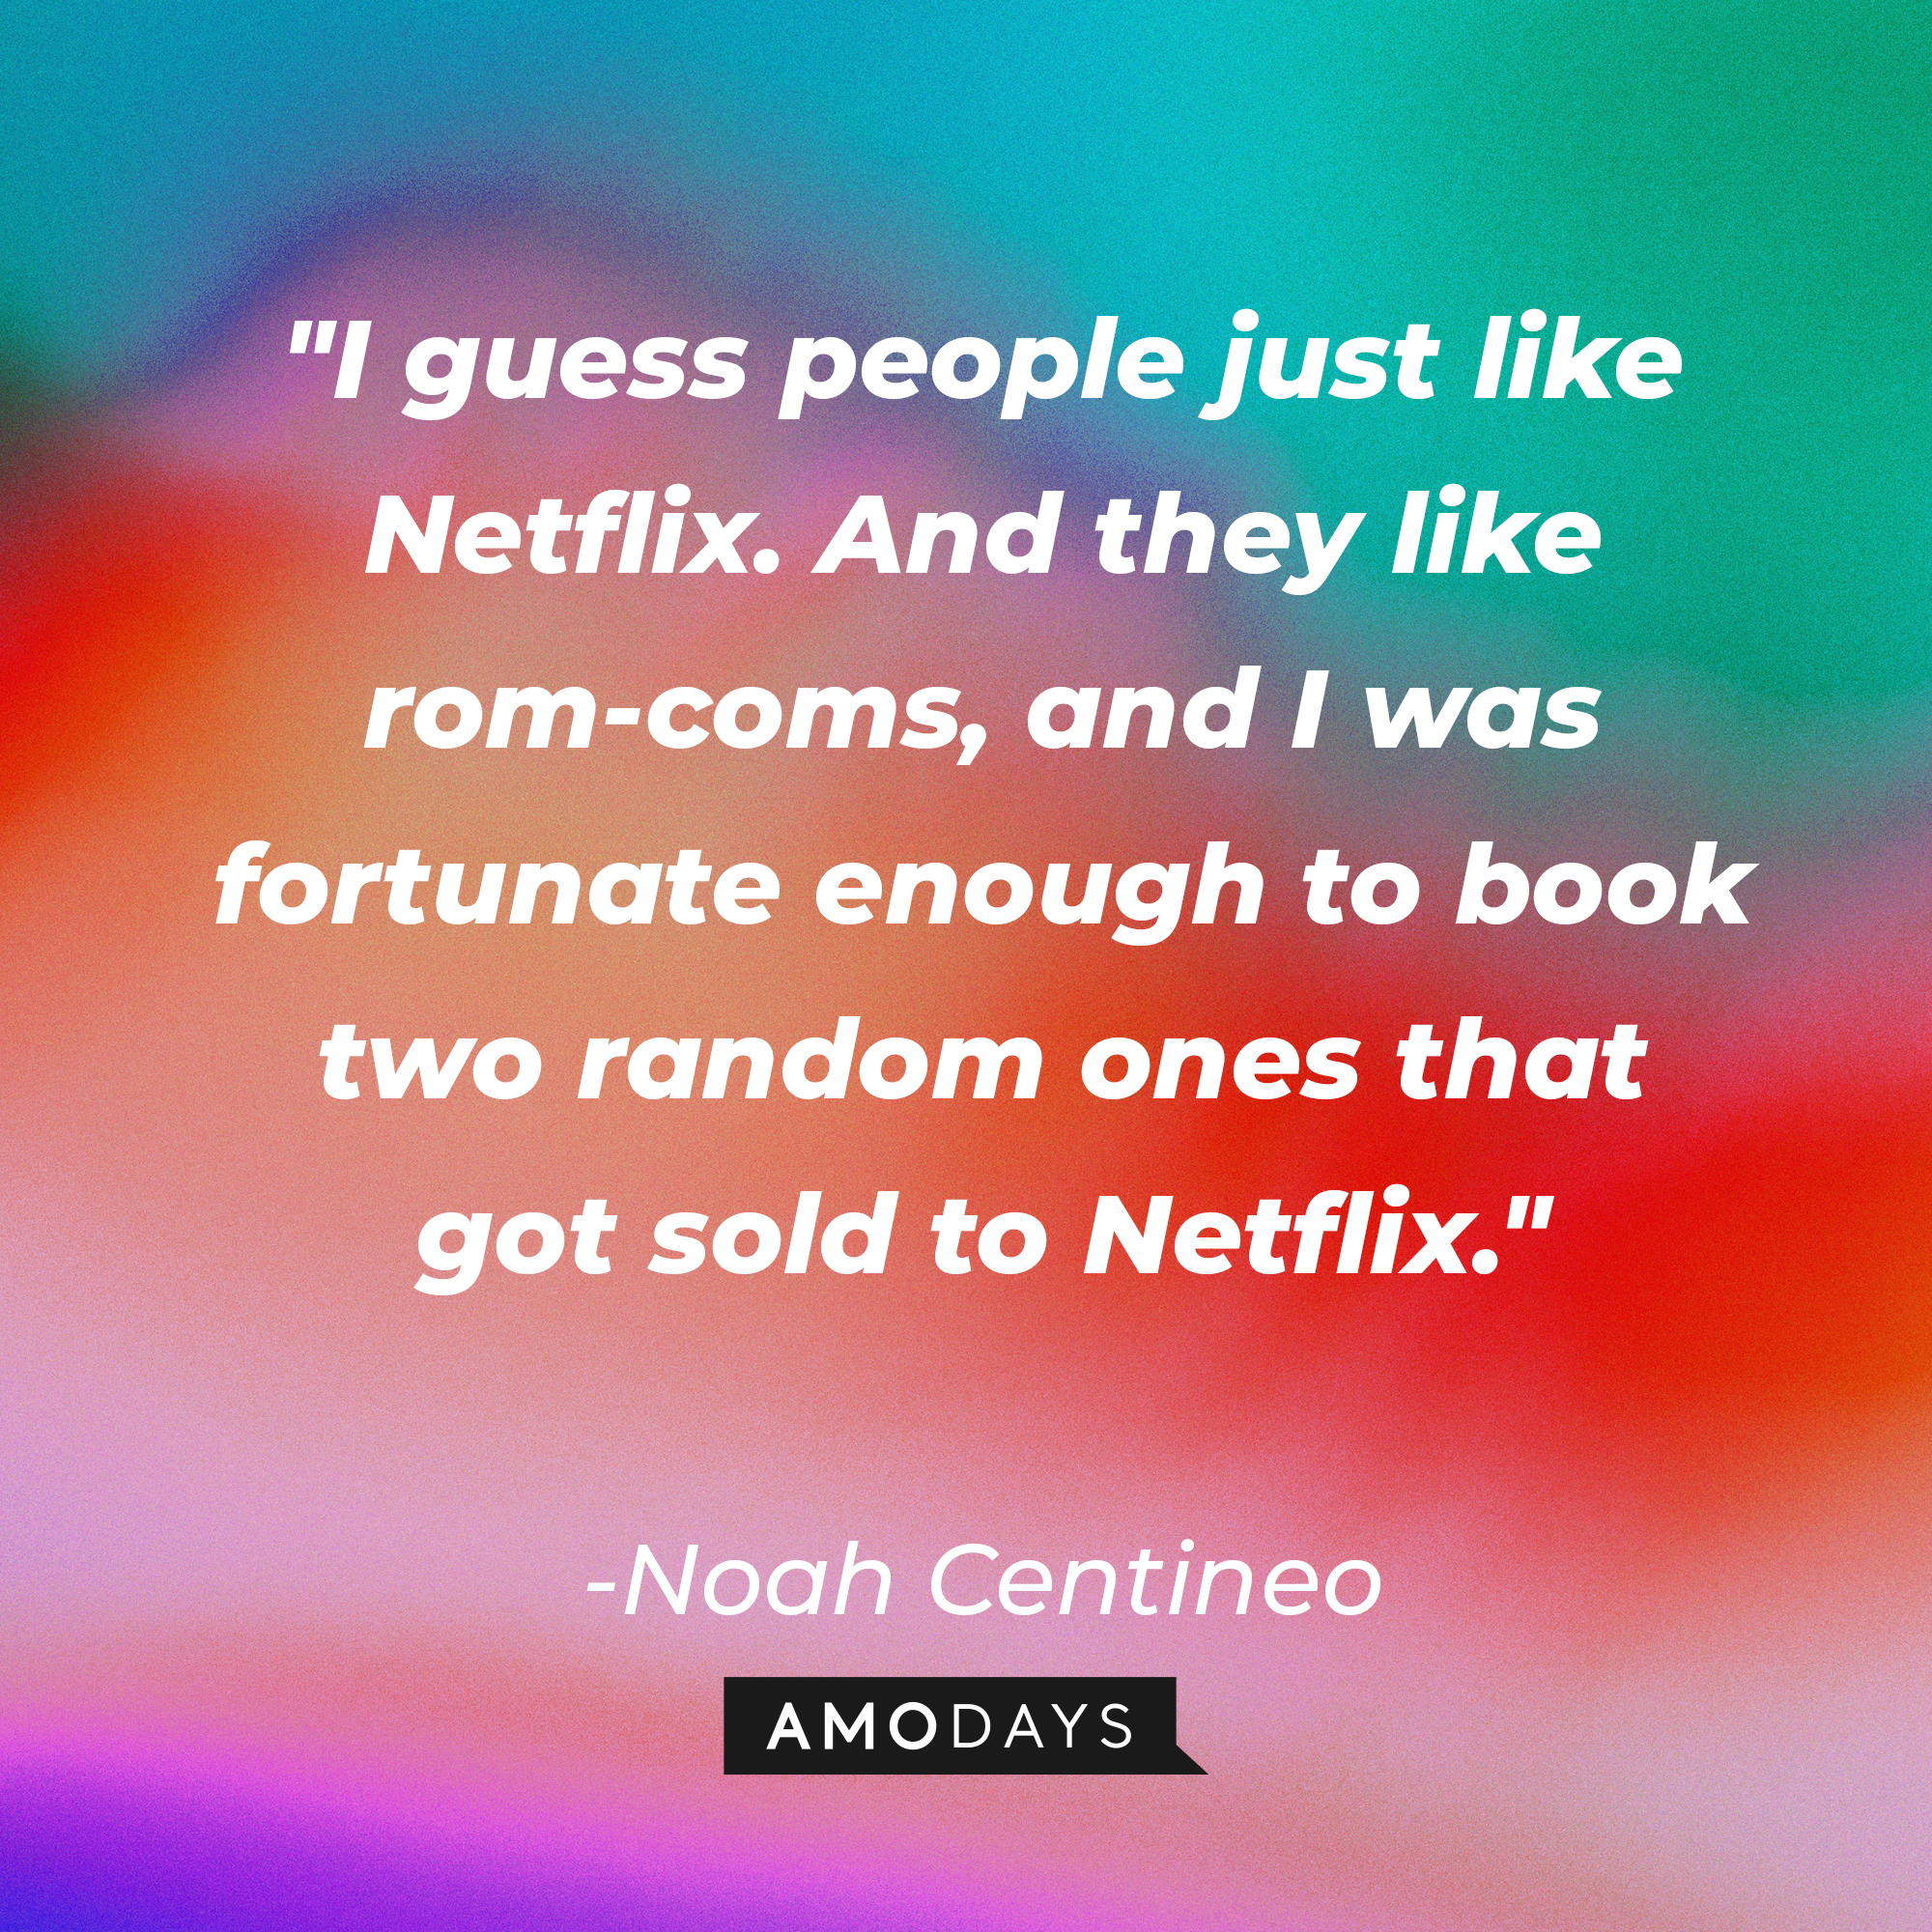 Noah Centineo's quote: "I guess people just like Netflix. And they like rom-coms, and I was fortunate enough to book two random ones that got sold to Netflix." | Image: AmoDays